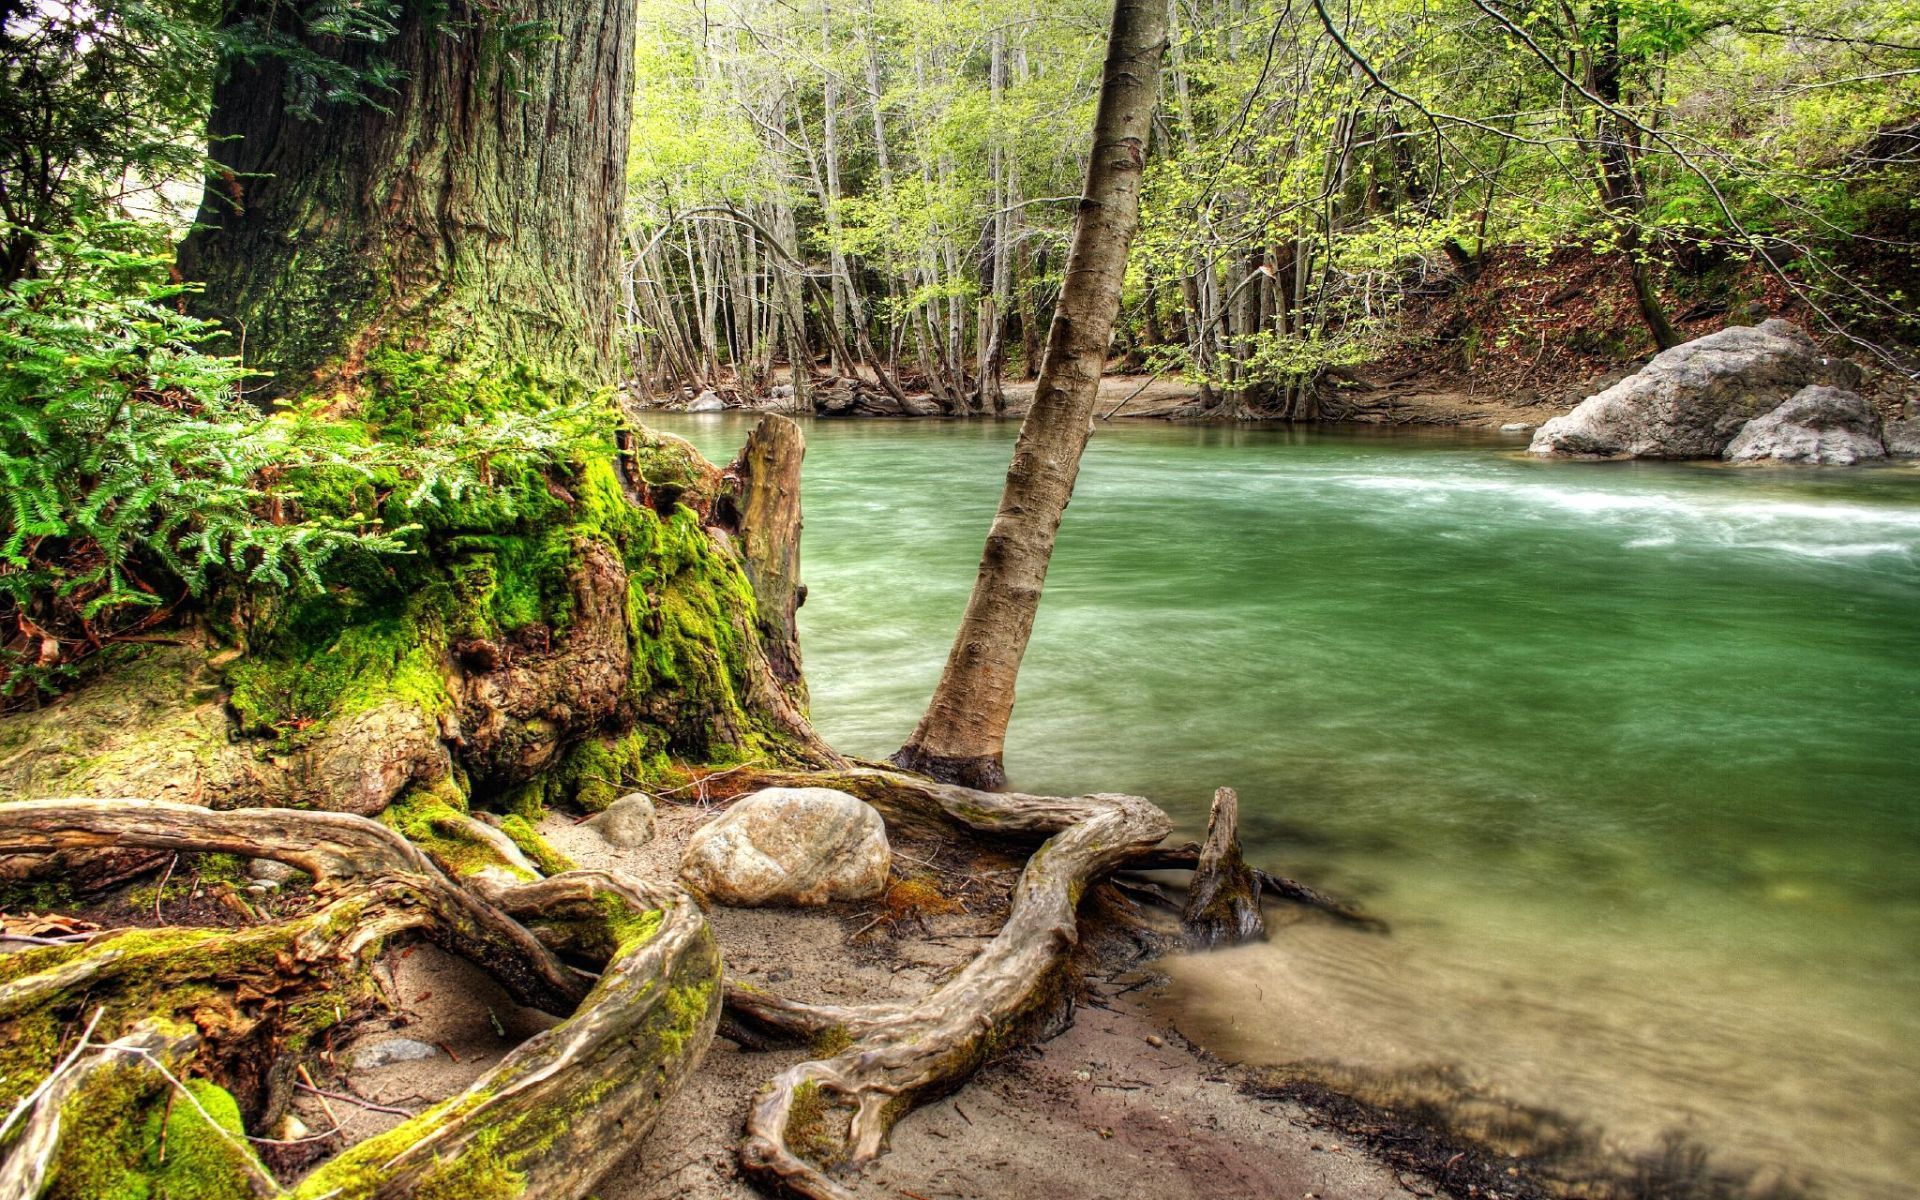 trees, rivers, roots, nature, water, flow, moss, gurgling, murmur, winding, sinuous